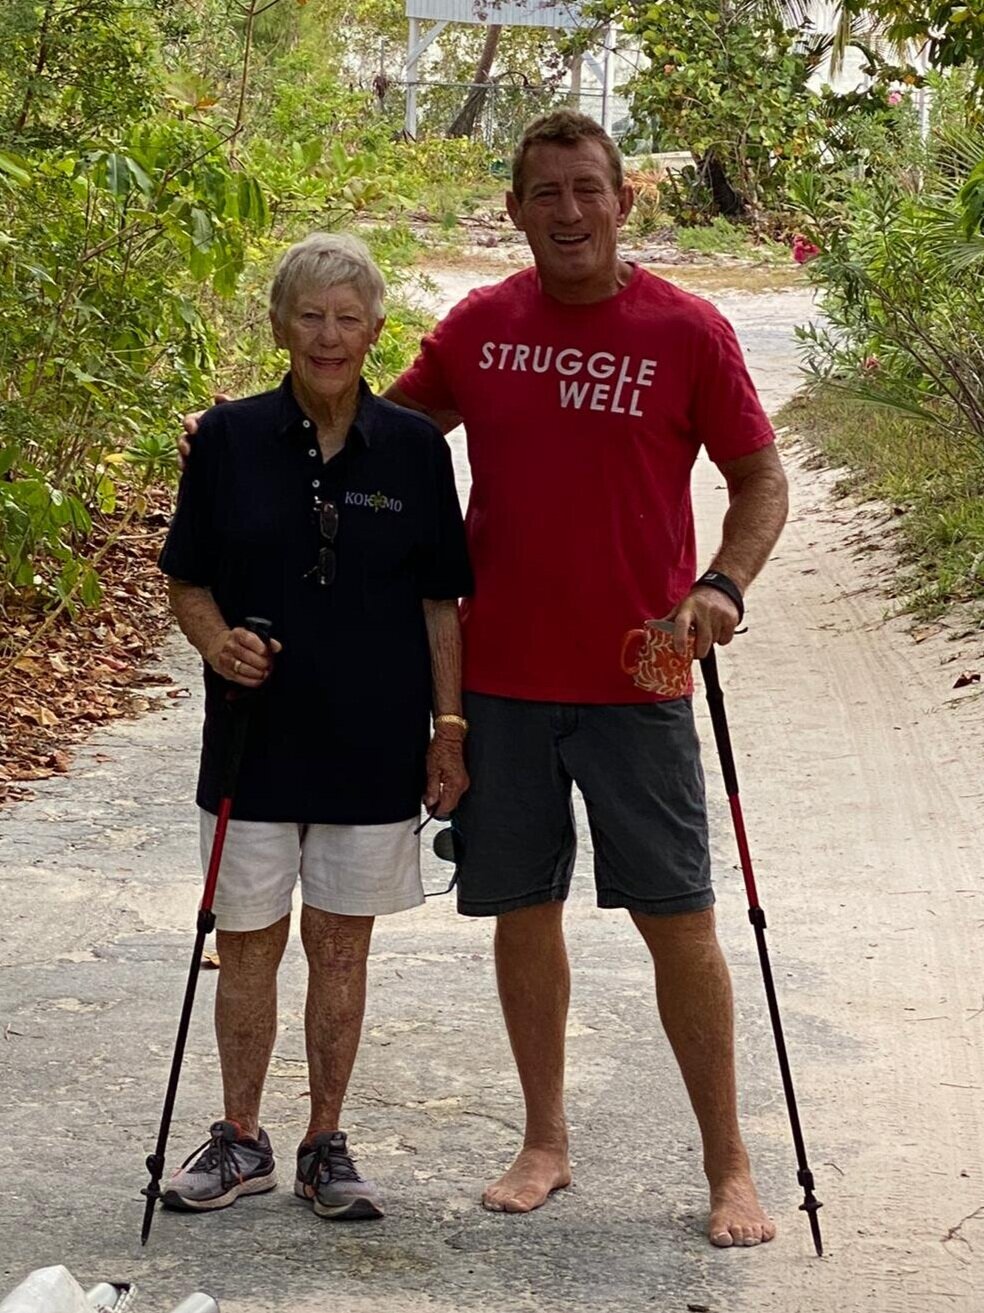 Sally and Chris had a tradition of daily walks in Cotton Bay as Chris recovered from a surgery and then again later during COVID restrictions.